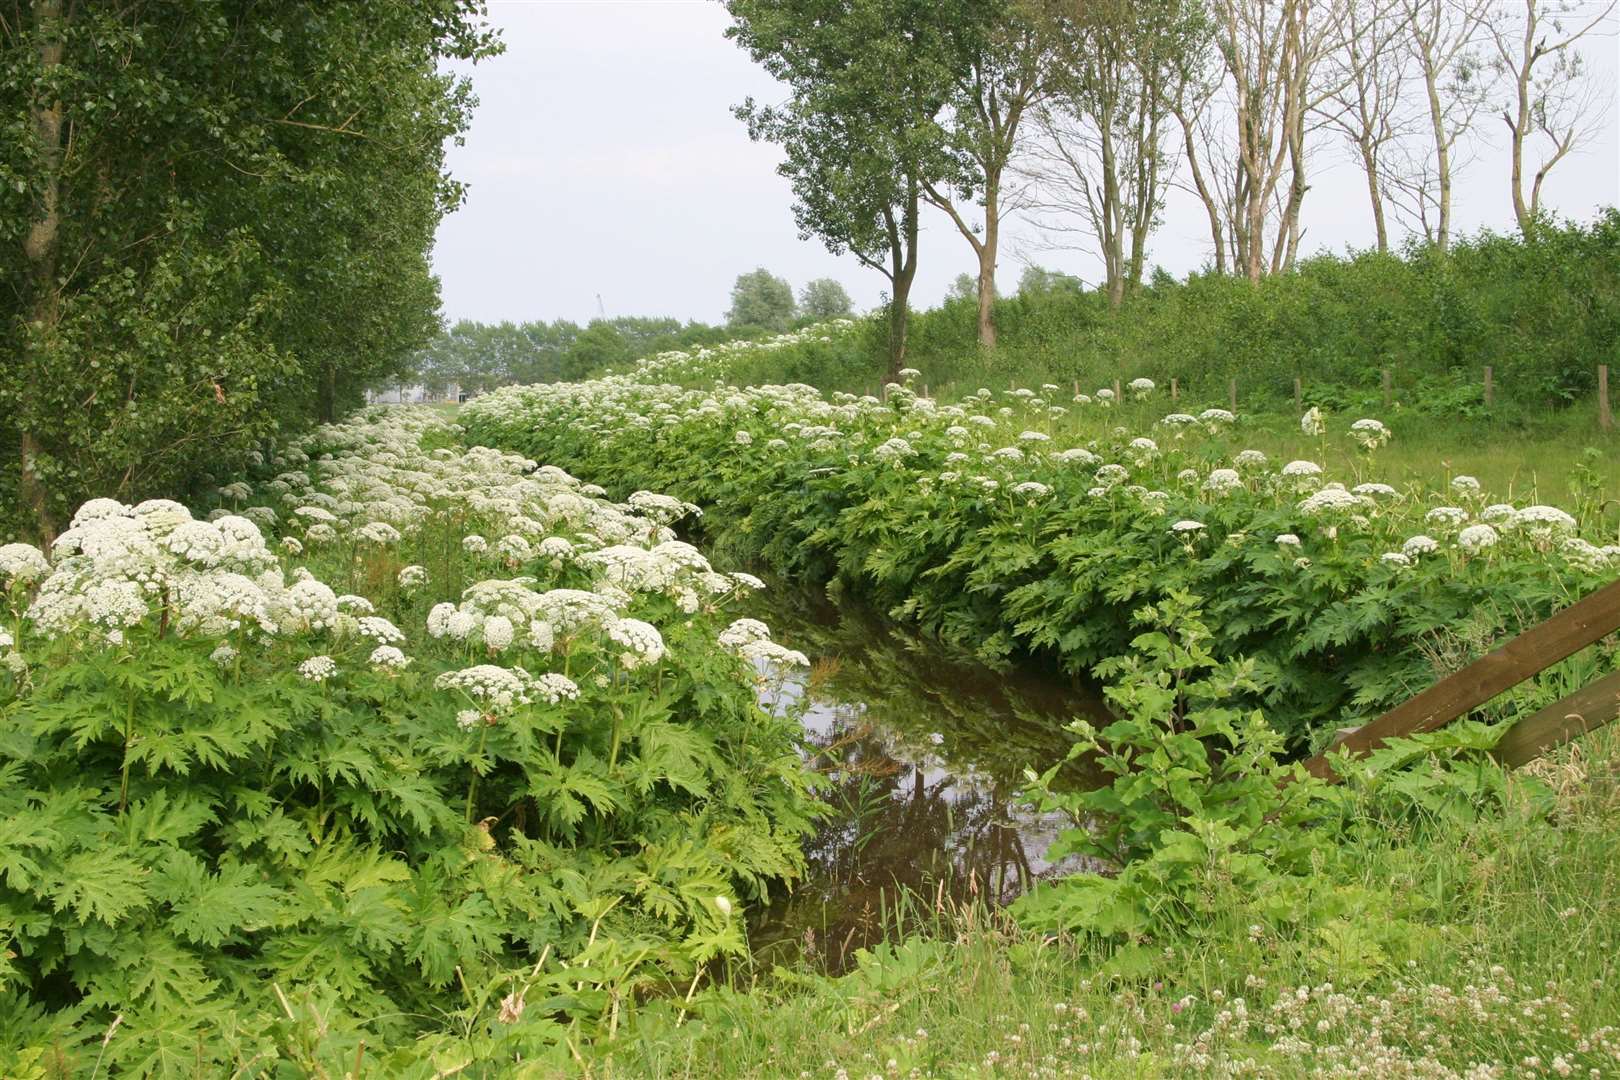 Giant hogweed can cause severe skin blistering and even scars